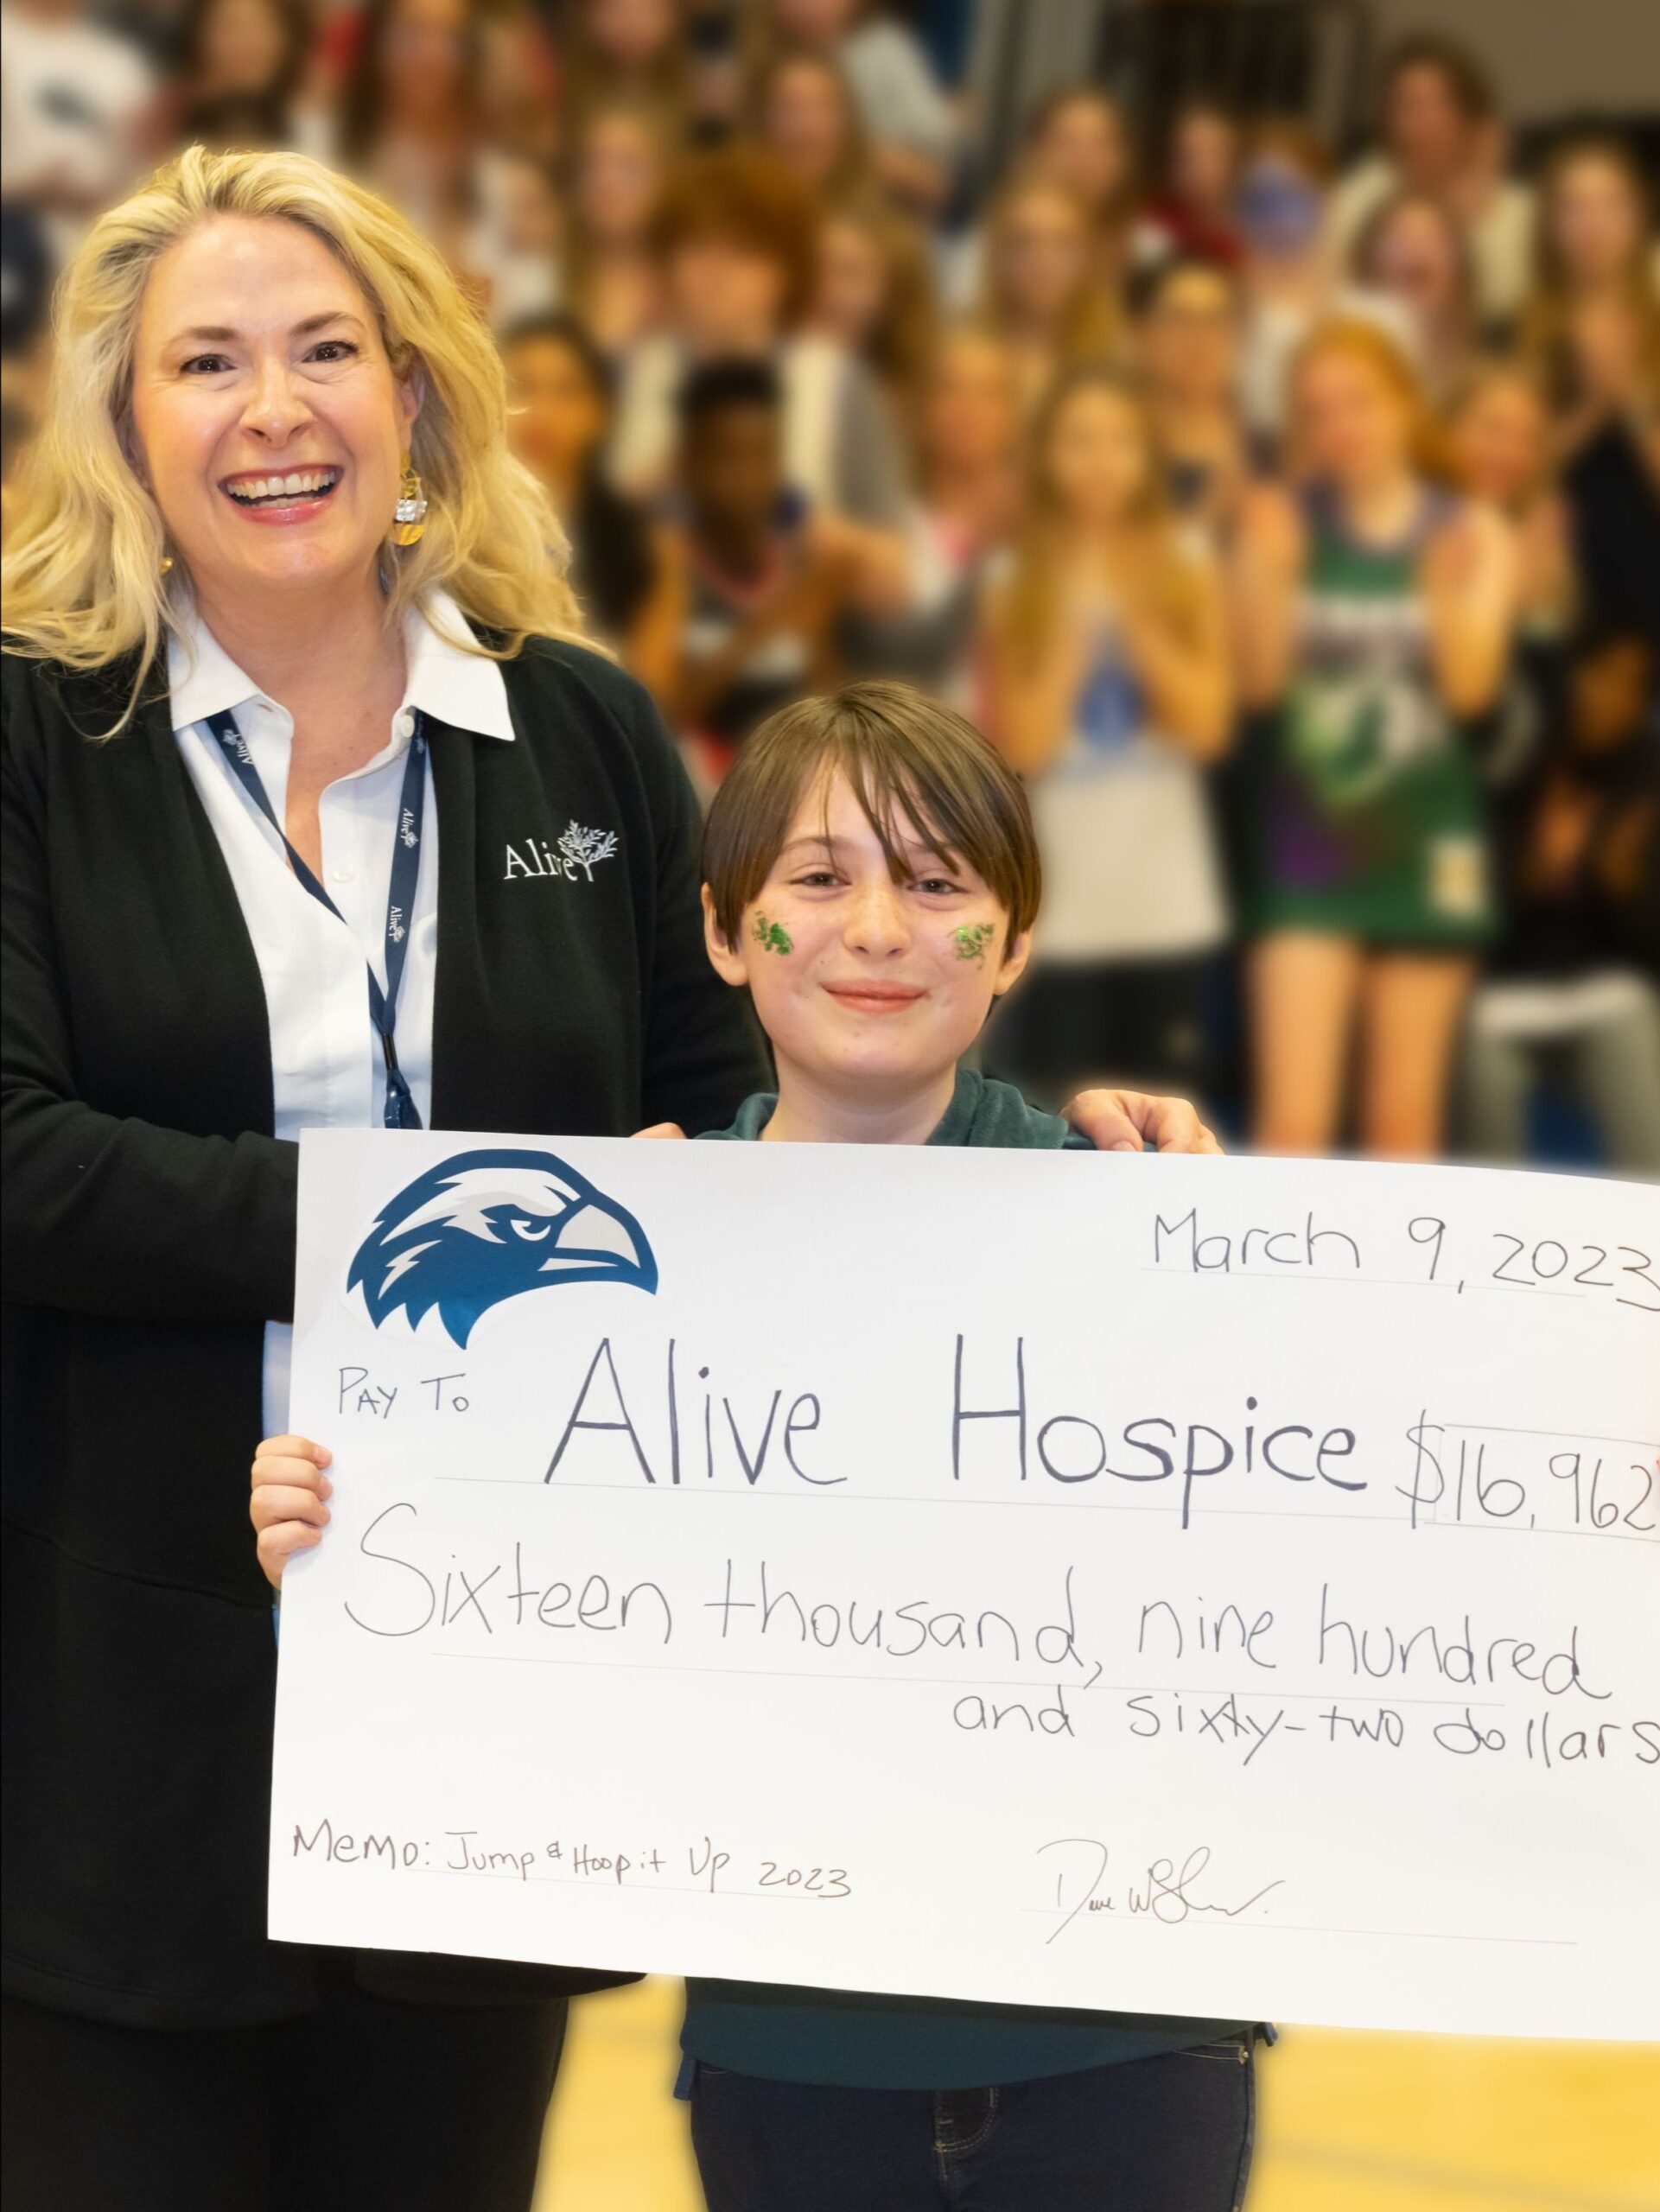 Student fundraiser for hospice patients and families